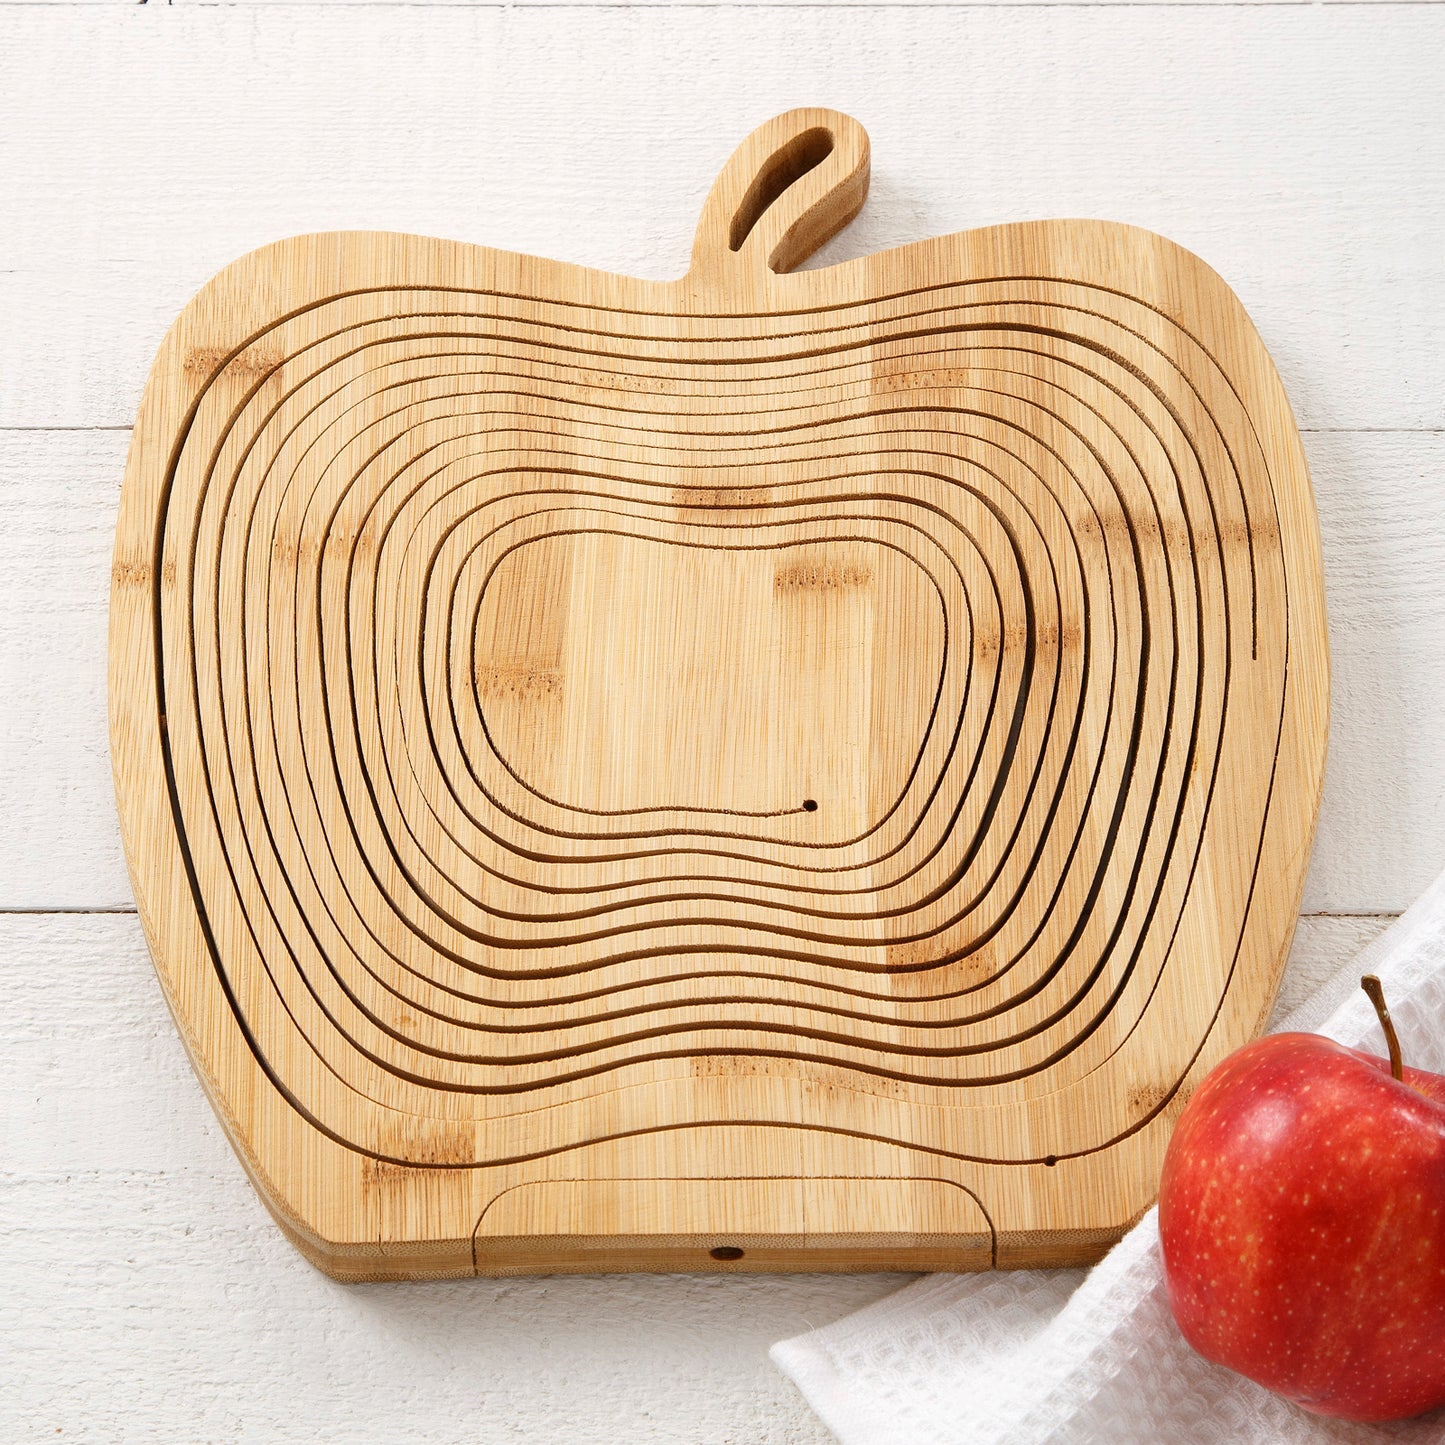 A collapsed apple-shaped wooden basket